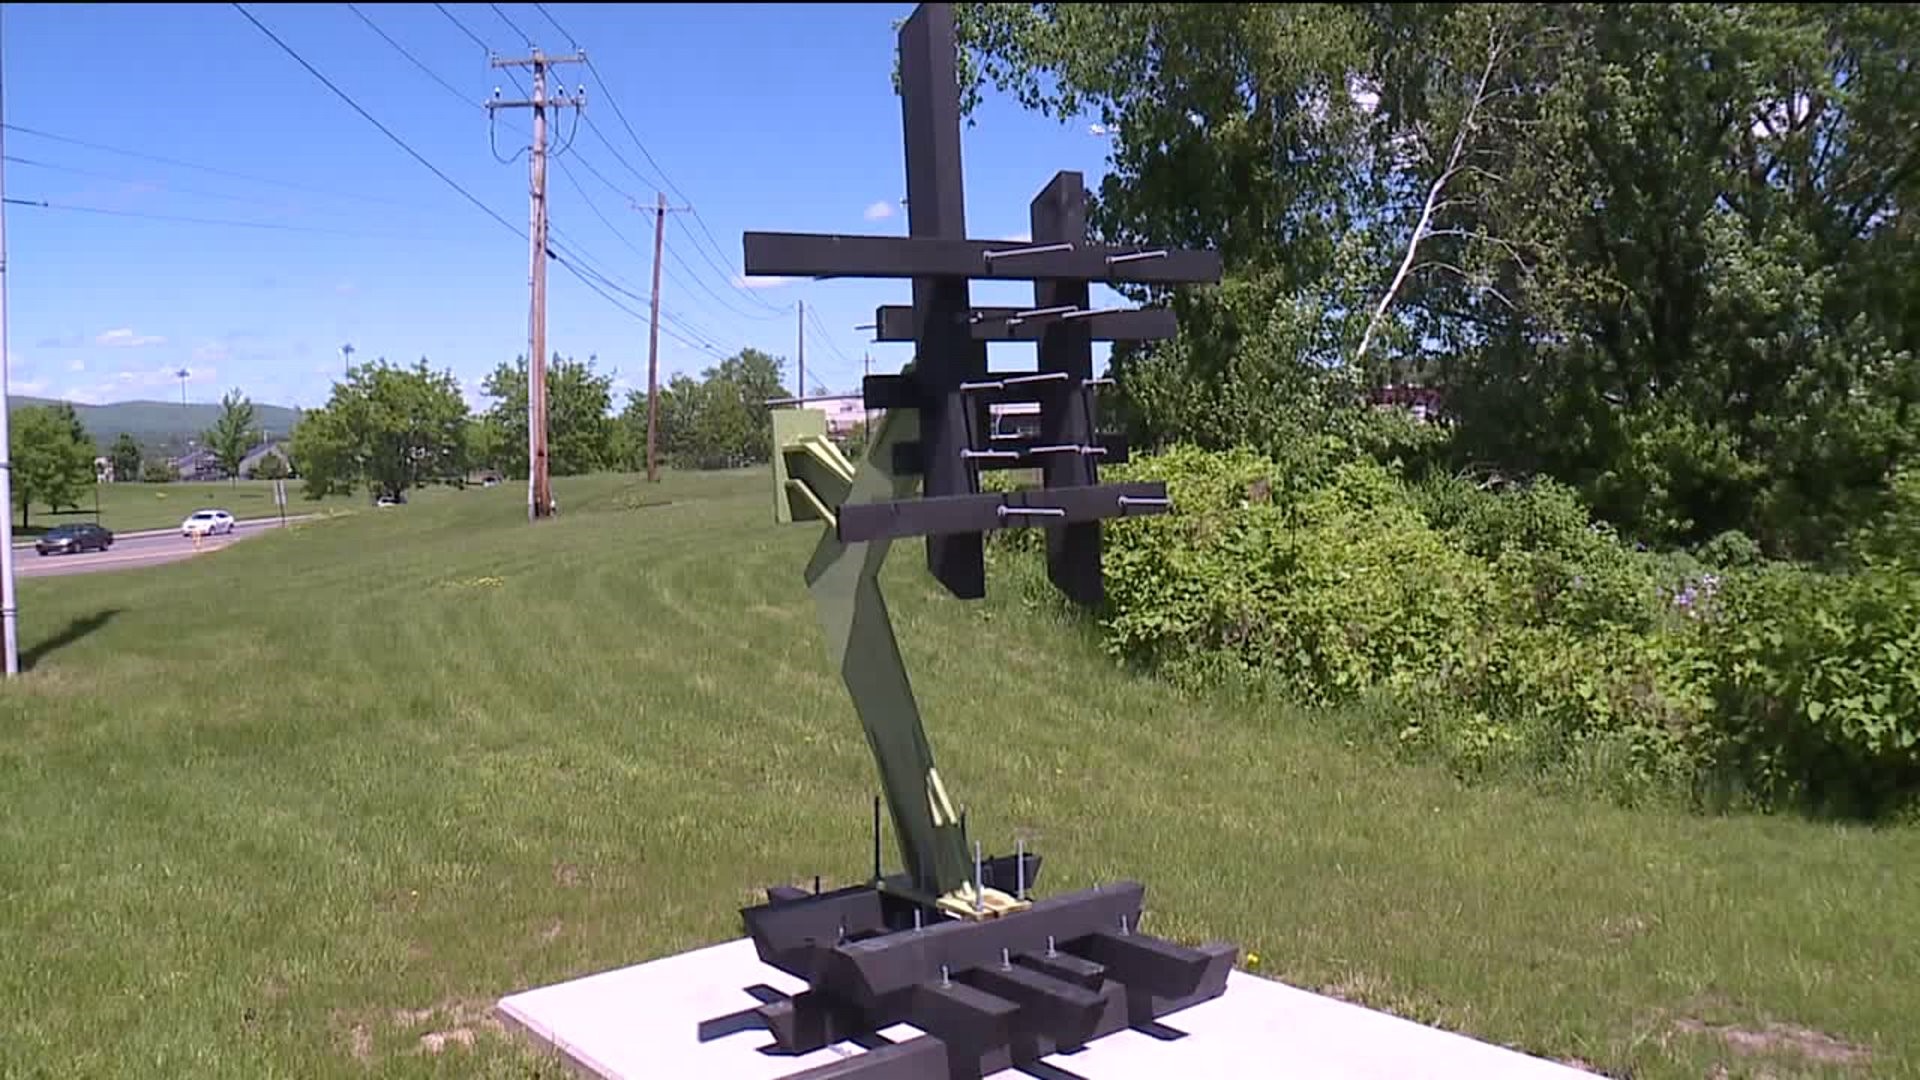 Trail Sculptures in Scranton to be Removed